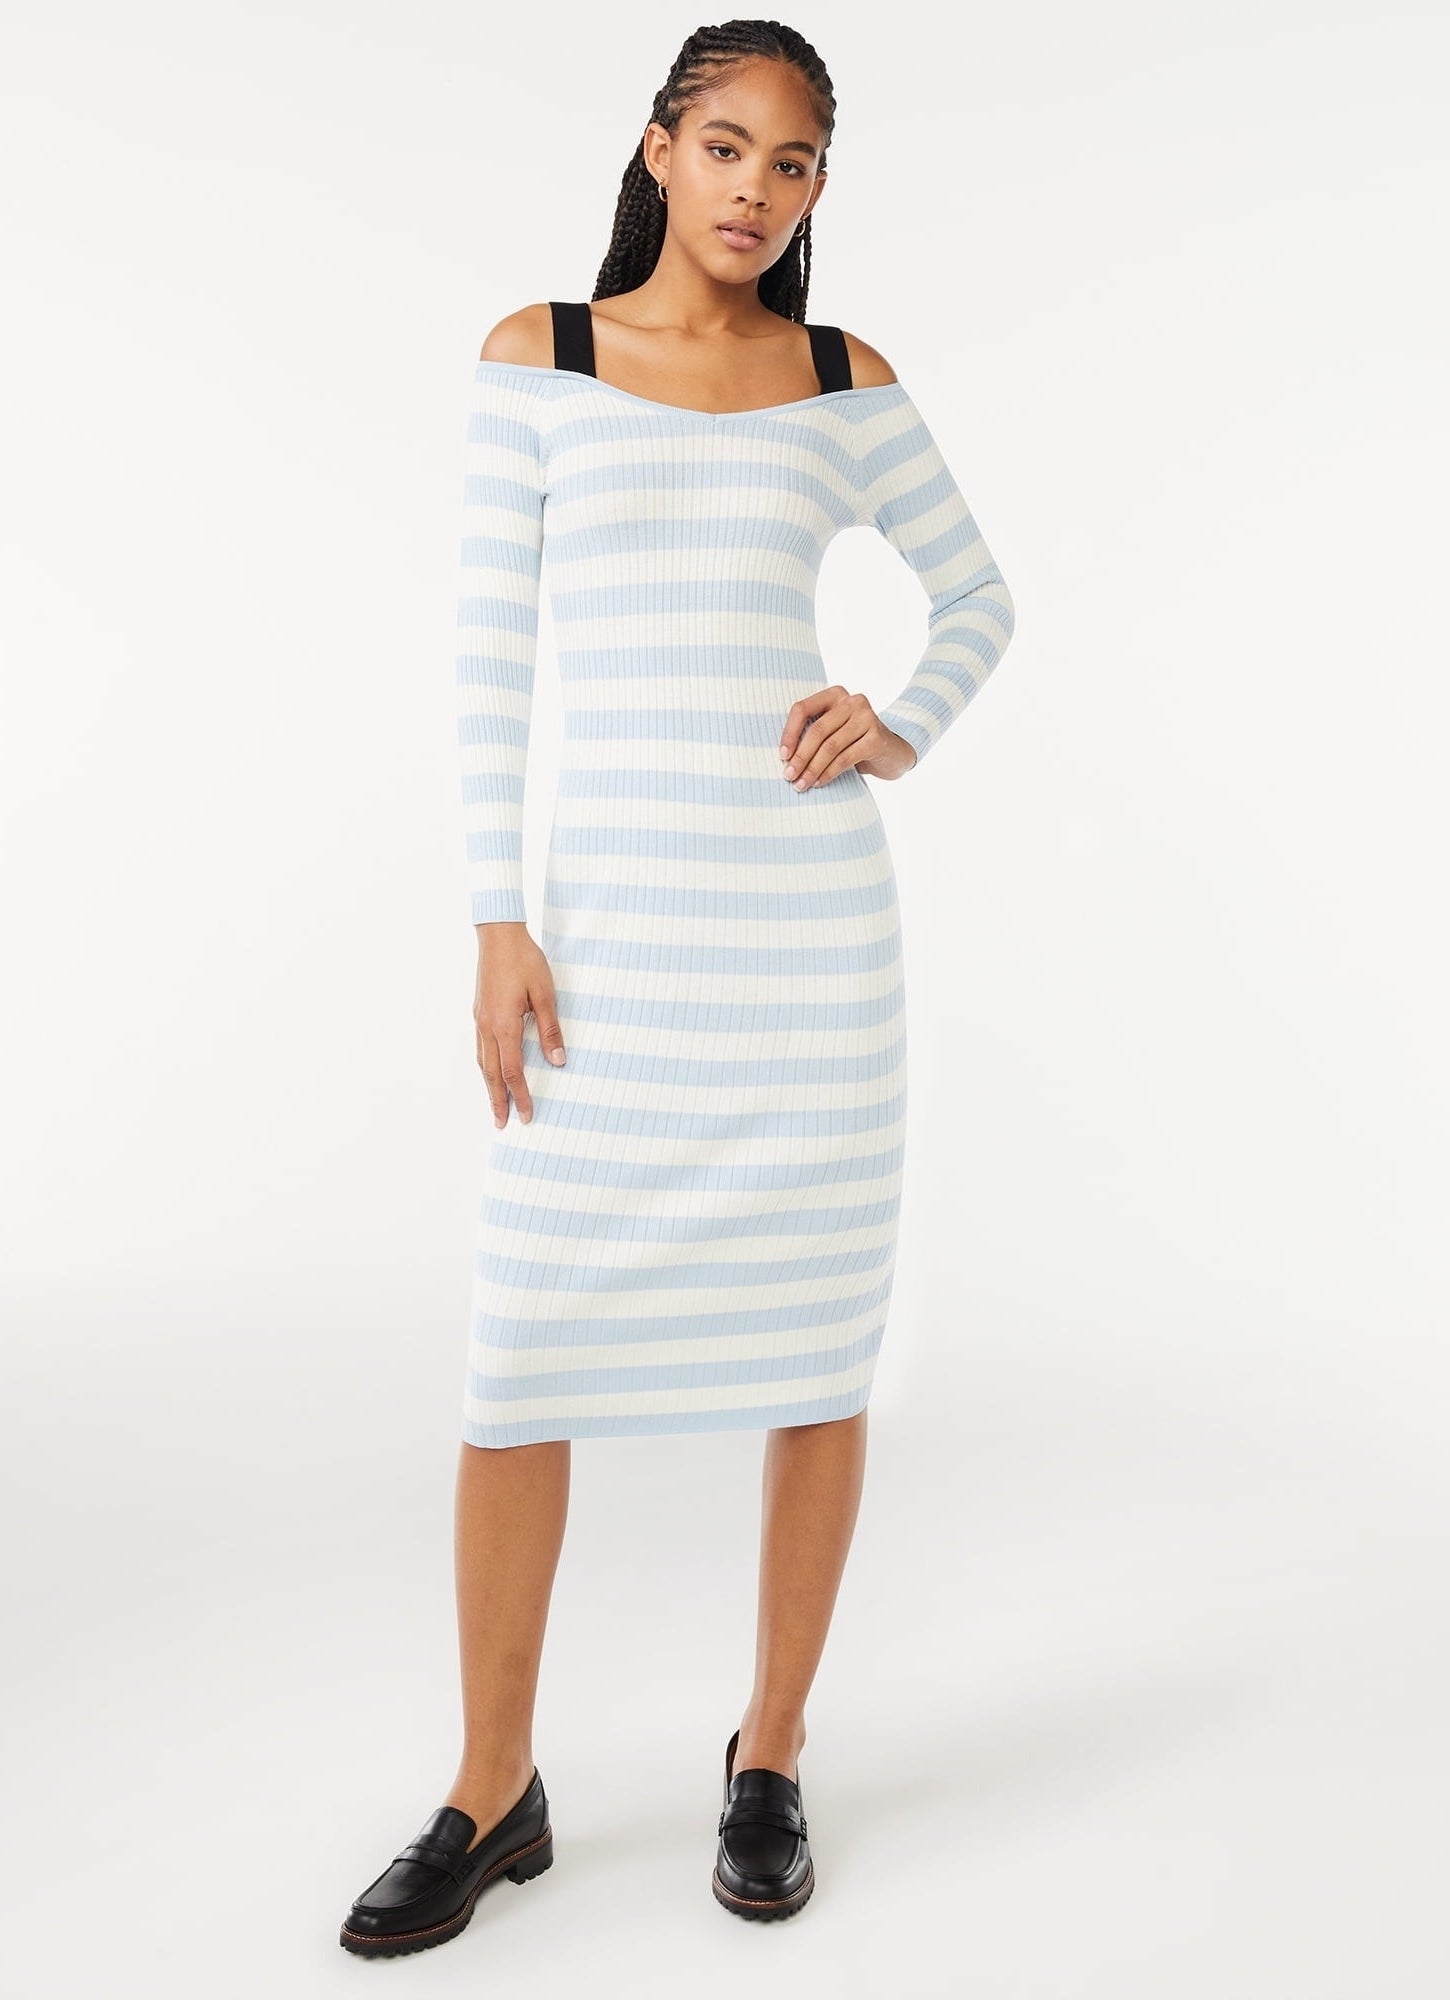 model wearing the light blue and white striped dress with black straps